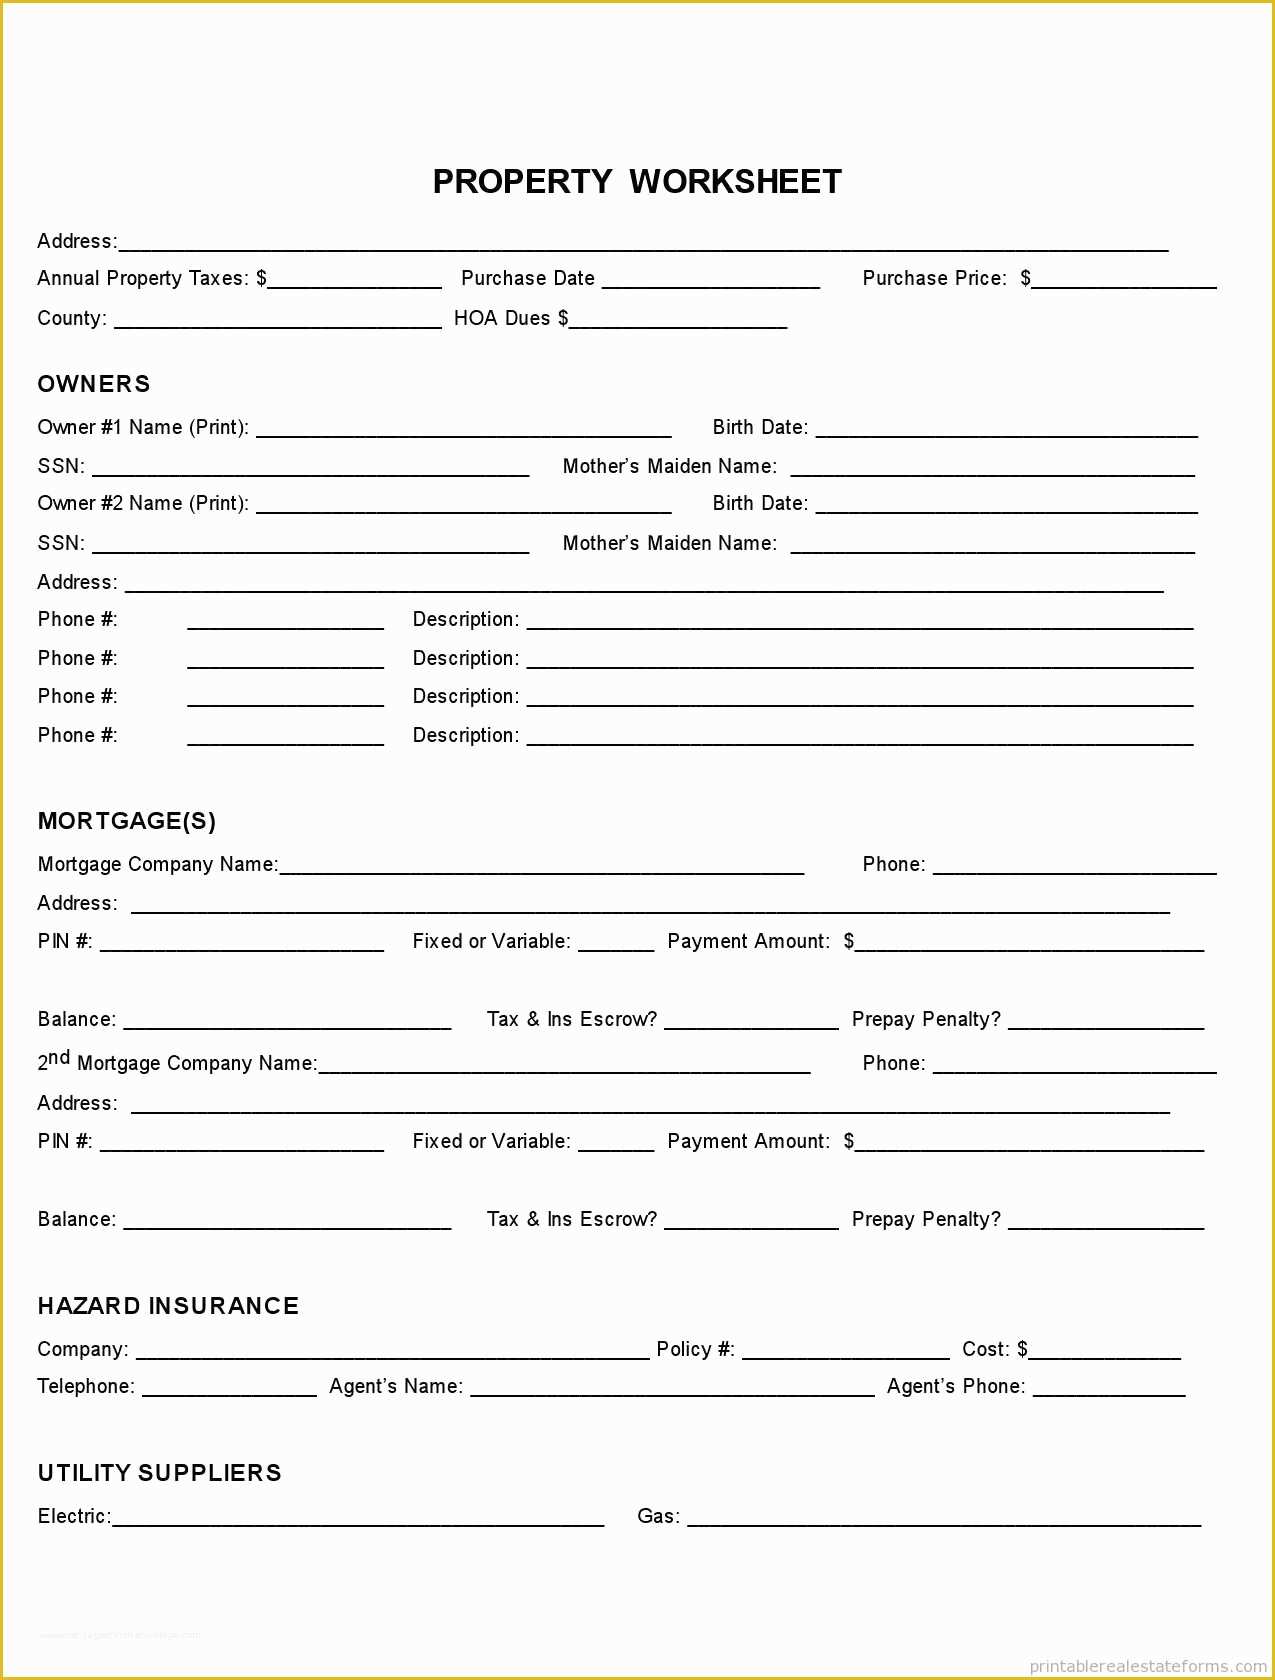 57-google-forms-templates-free-heritagechristiancollege